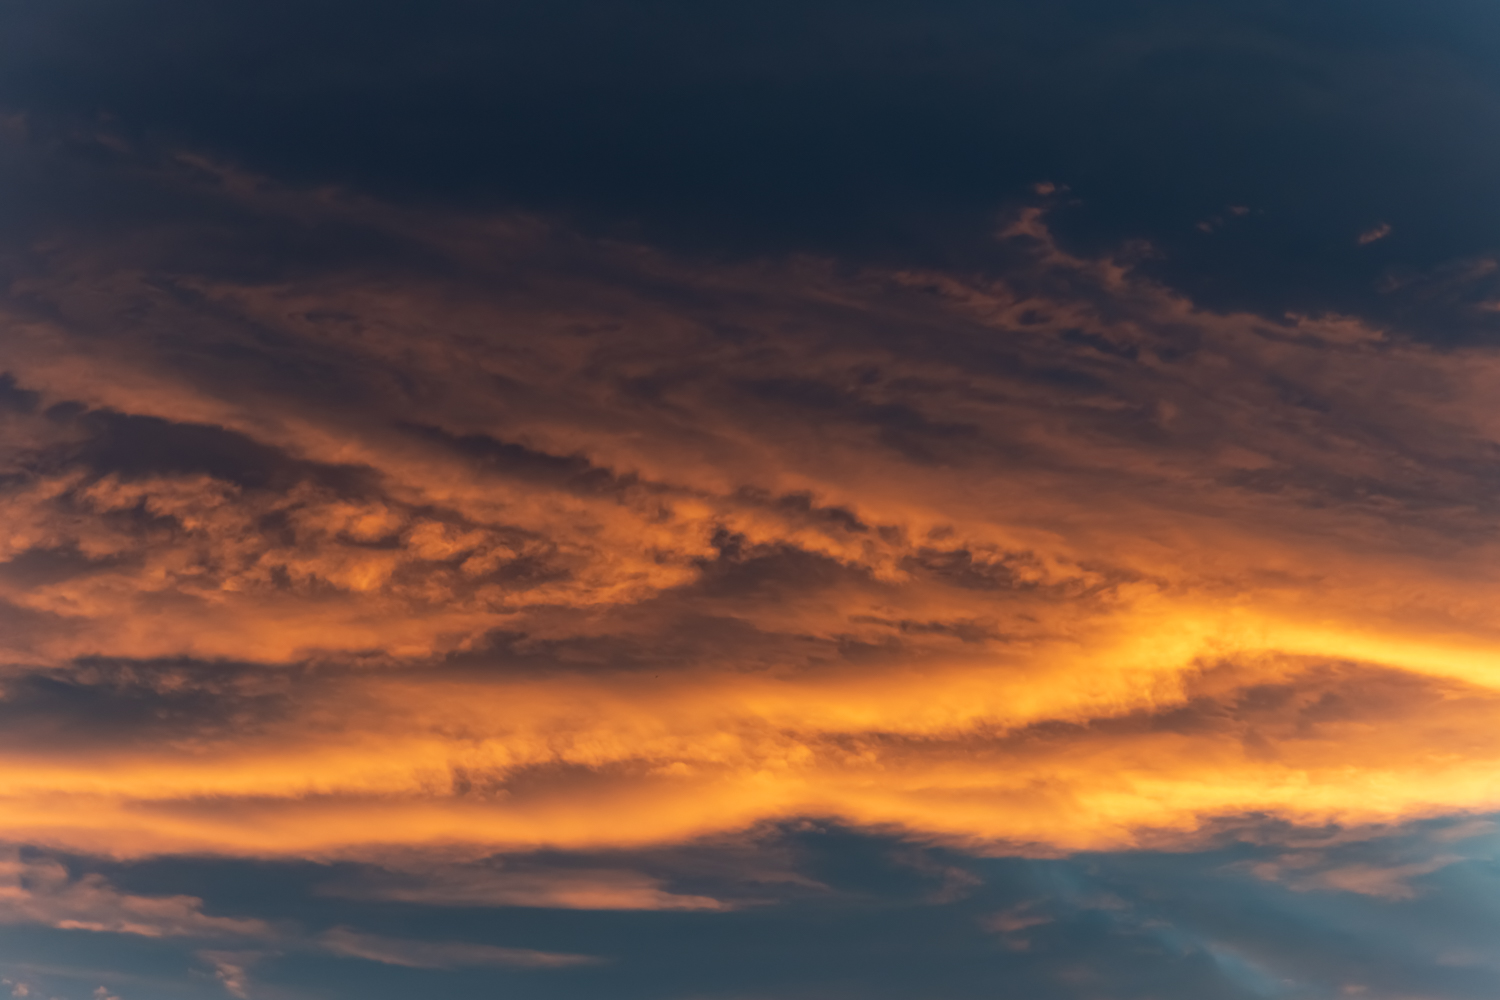 Deep orange and yellow clouds in a sunset sky